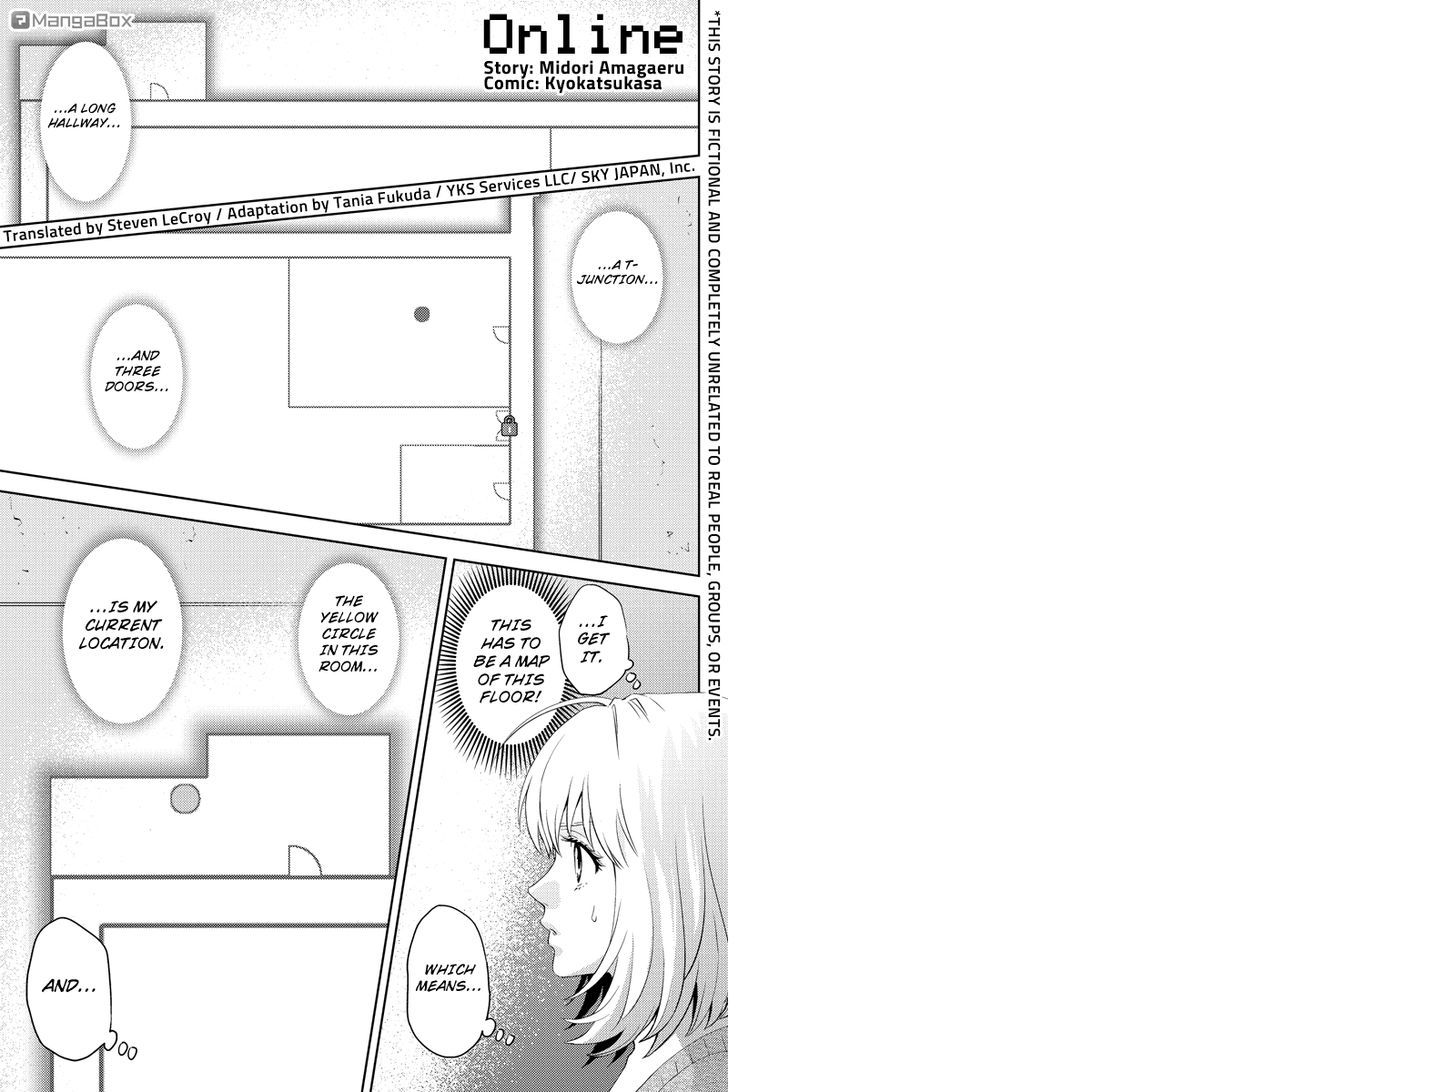 Online - The Comic Chapter 15.2 #1